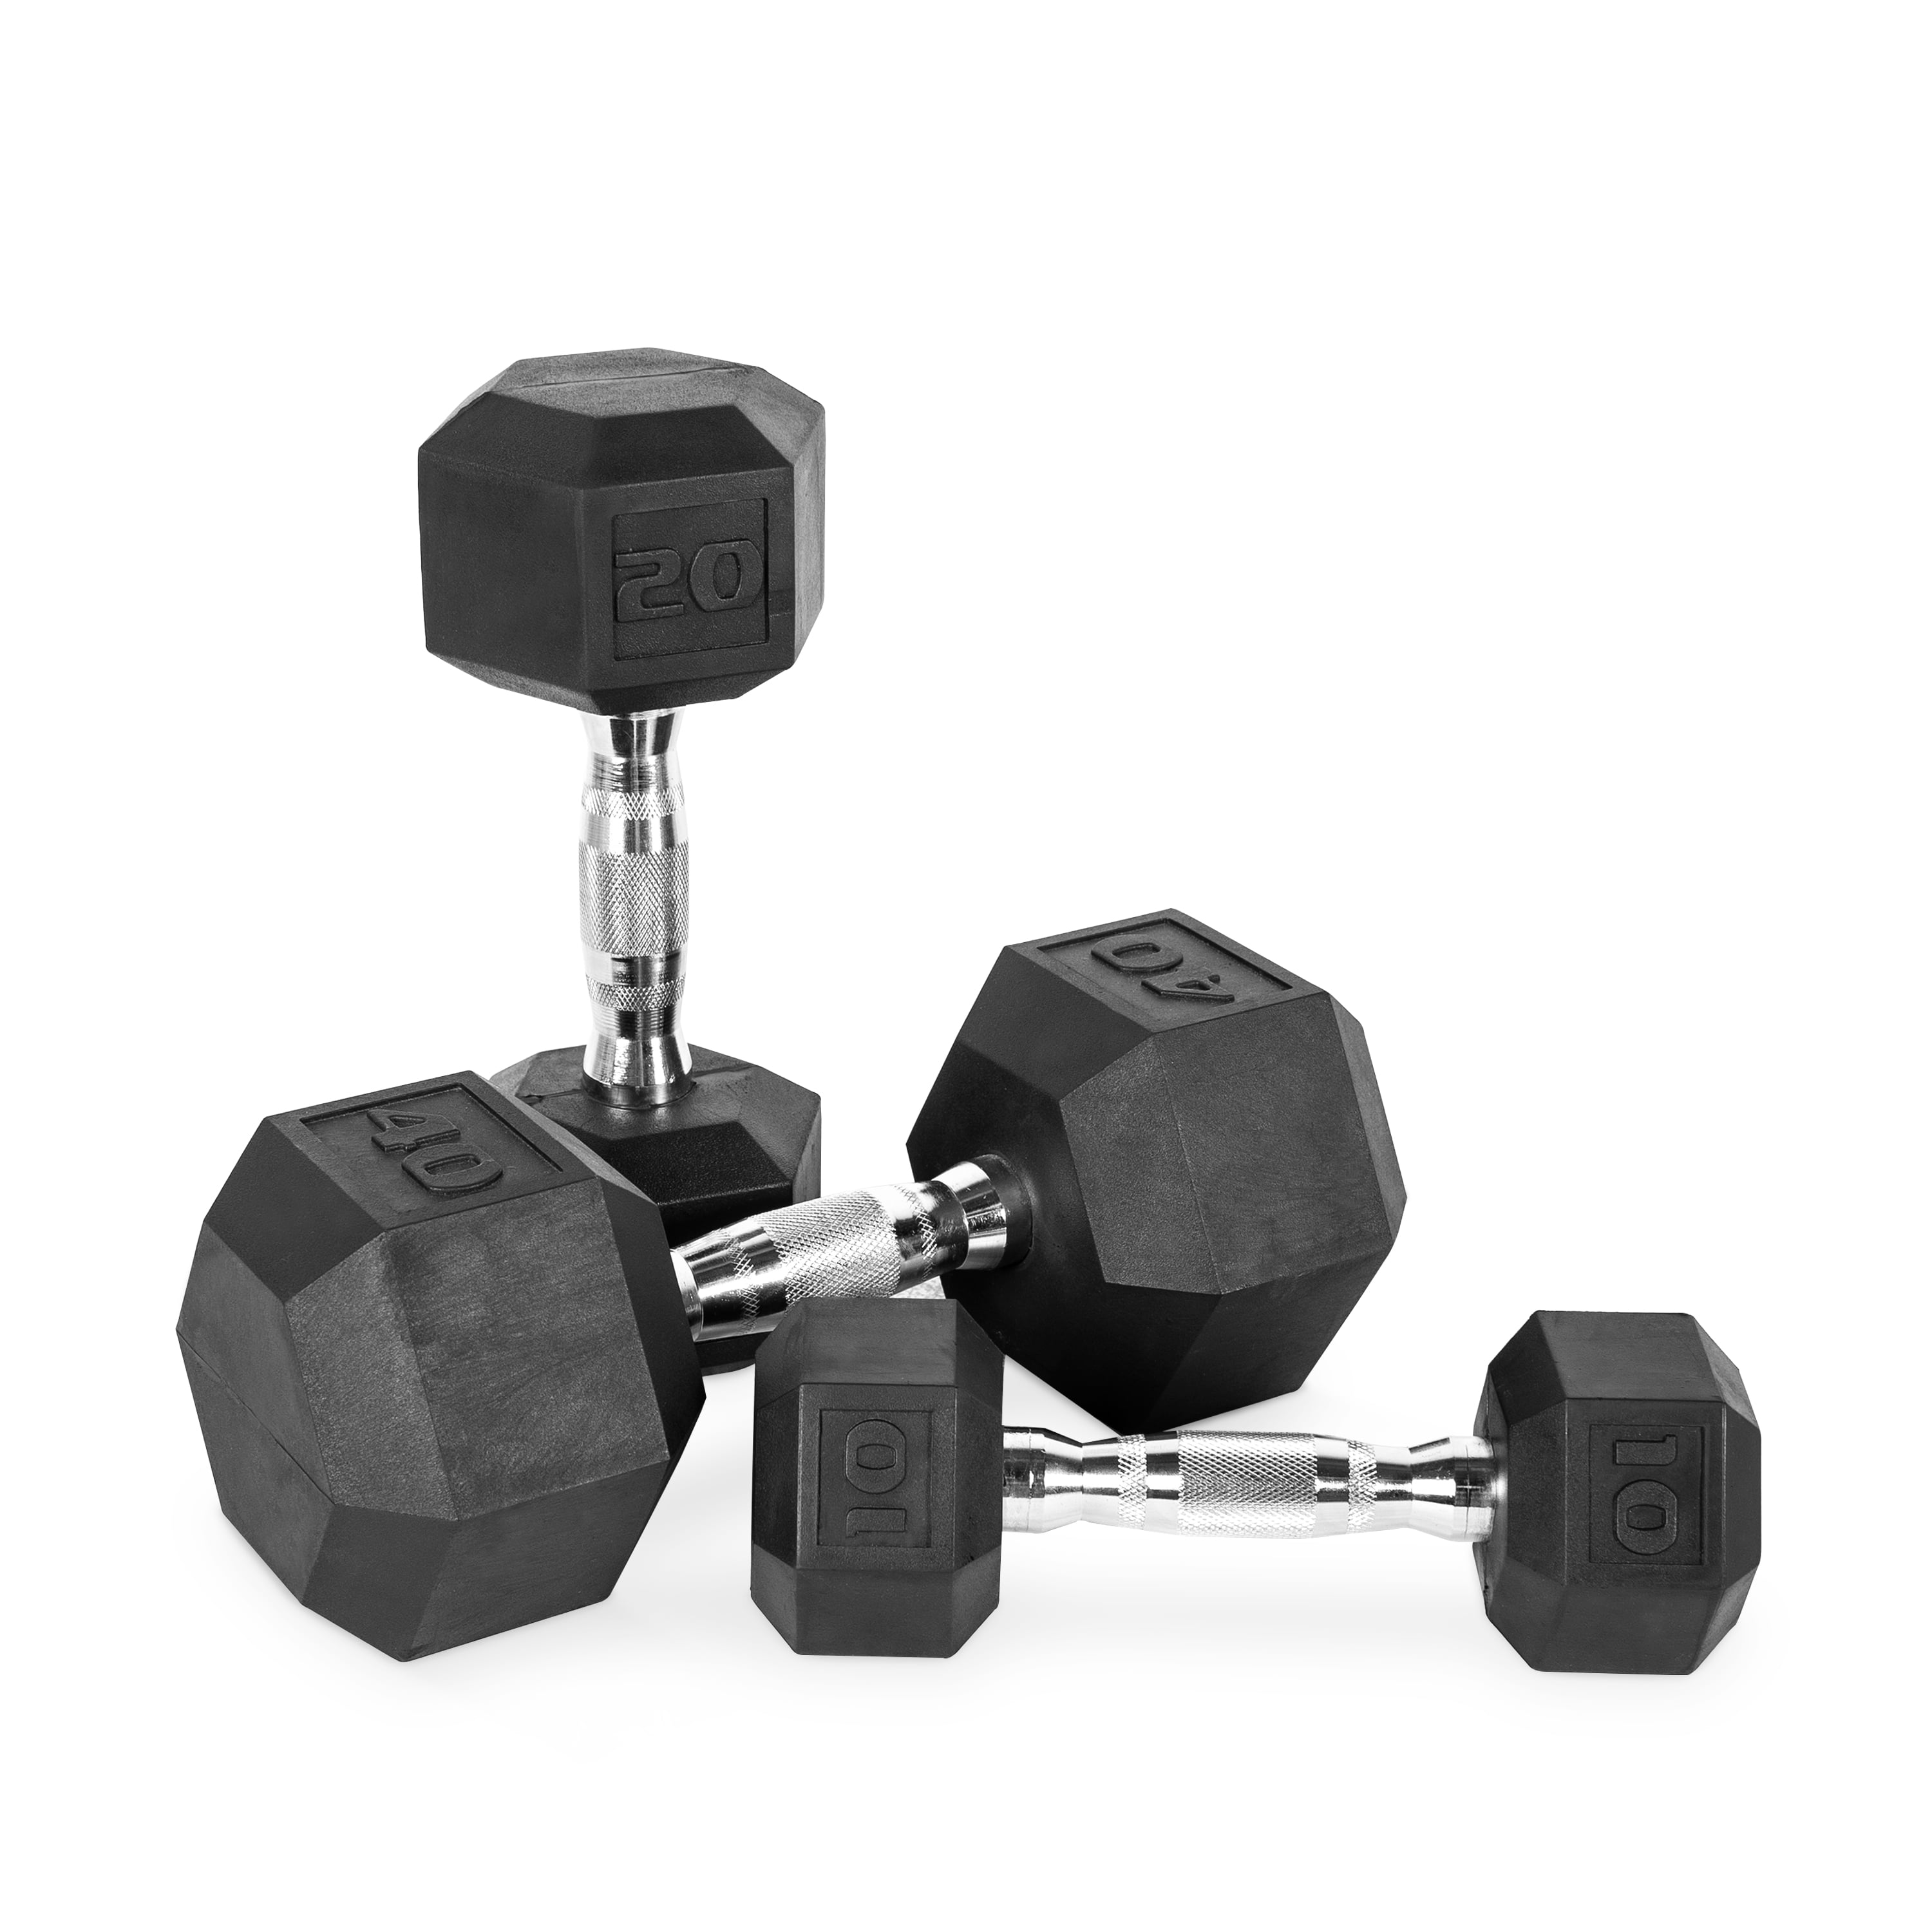 NEW CAP SINGLE 10LB RUBBER COATED HEX DUMBBELL WEIGHT 10 POUND FAST SHPPING 